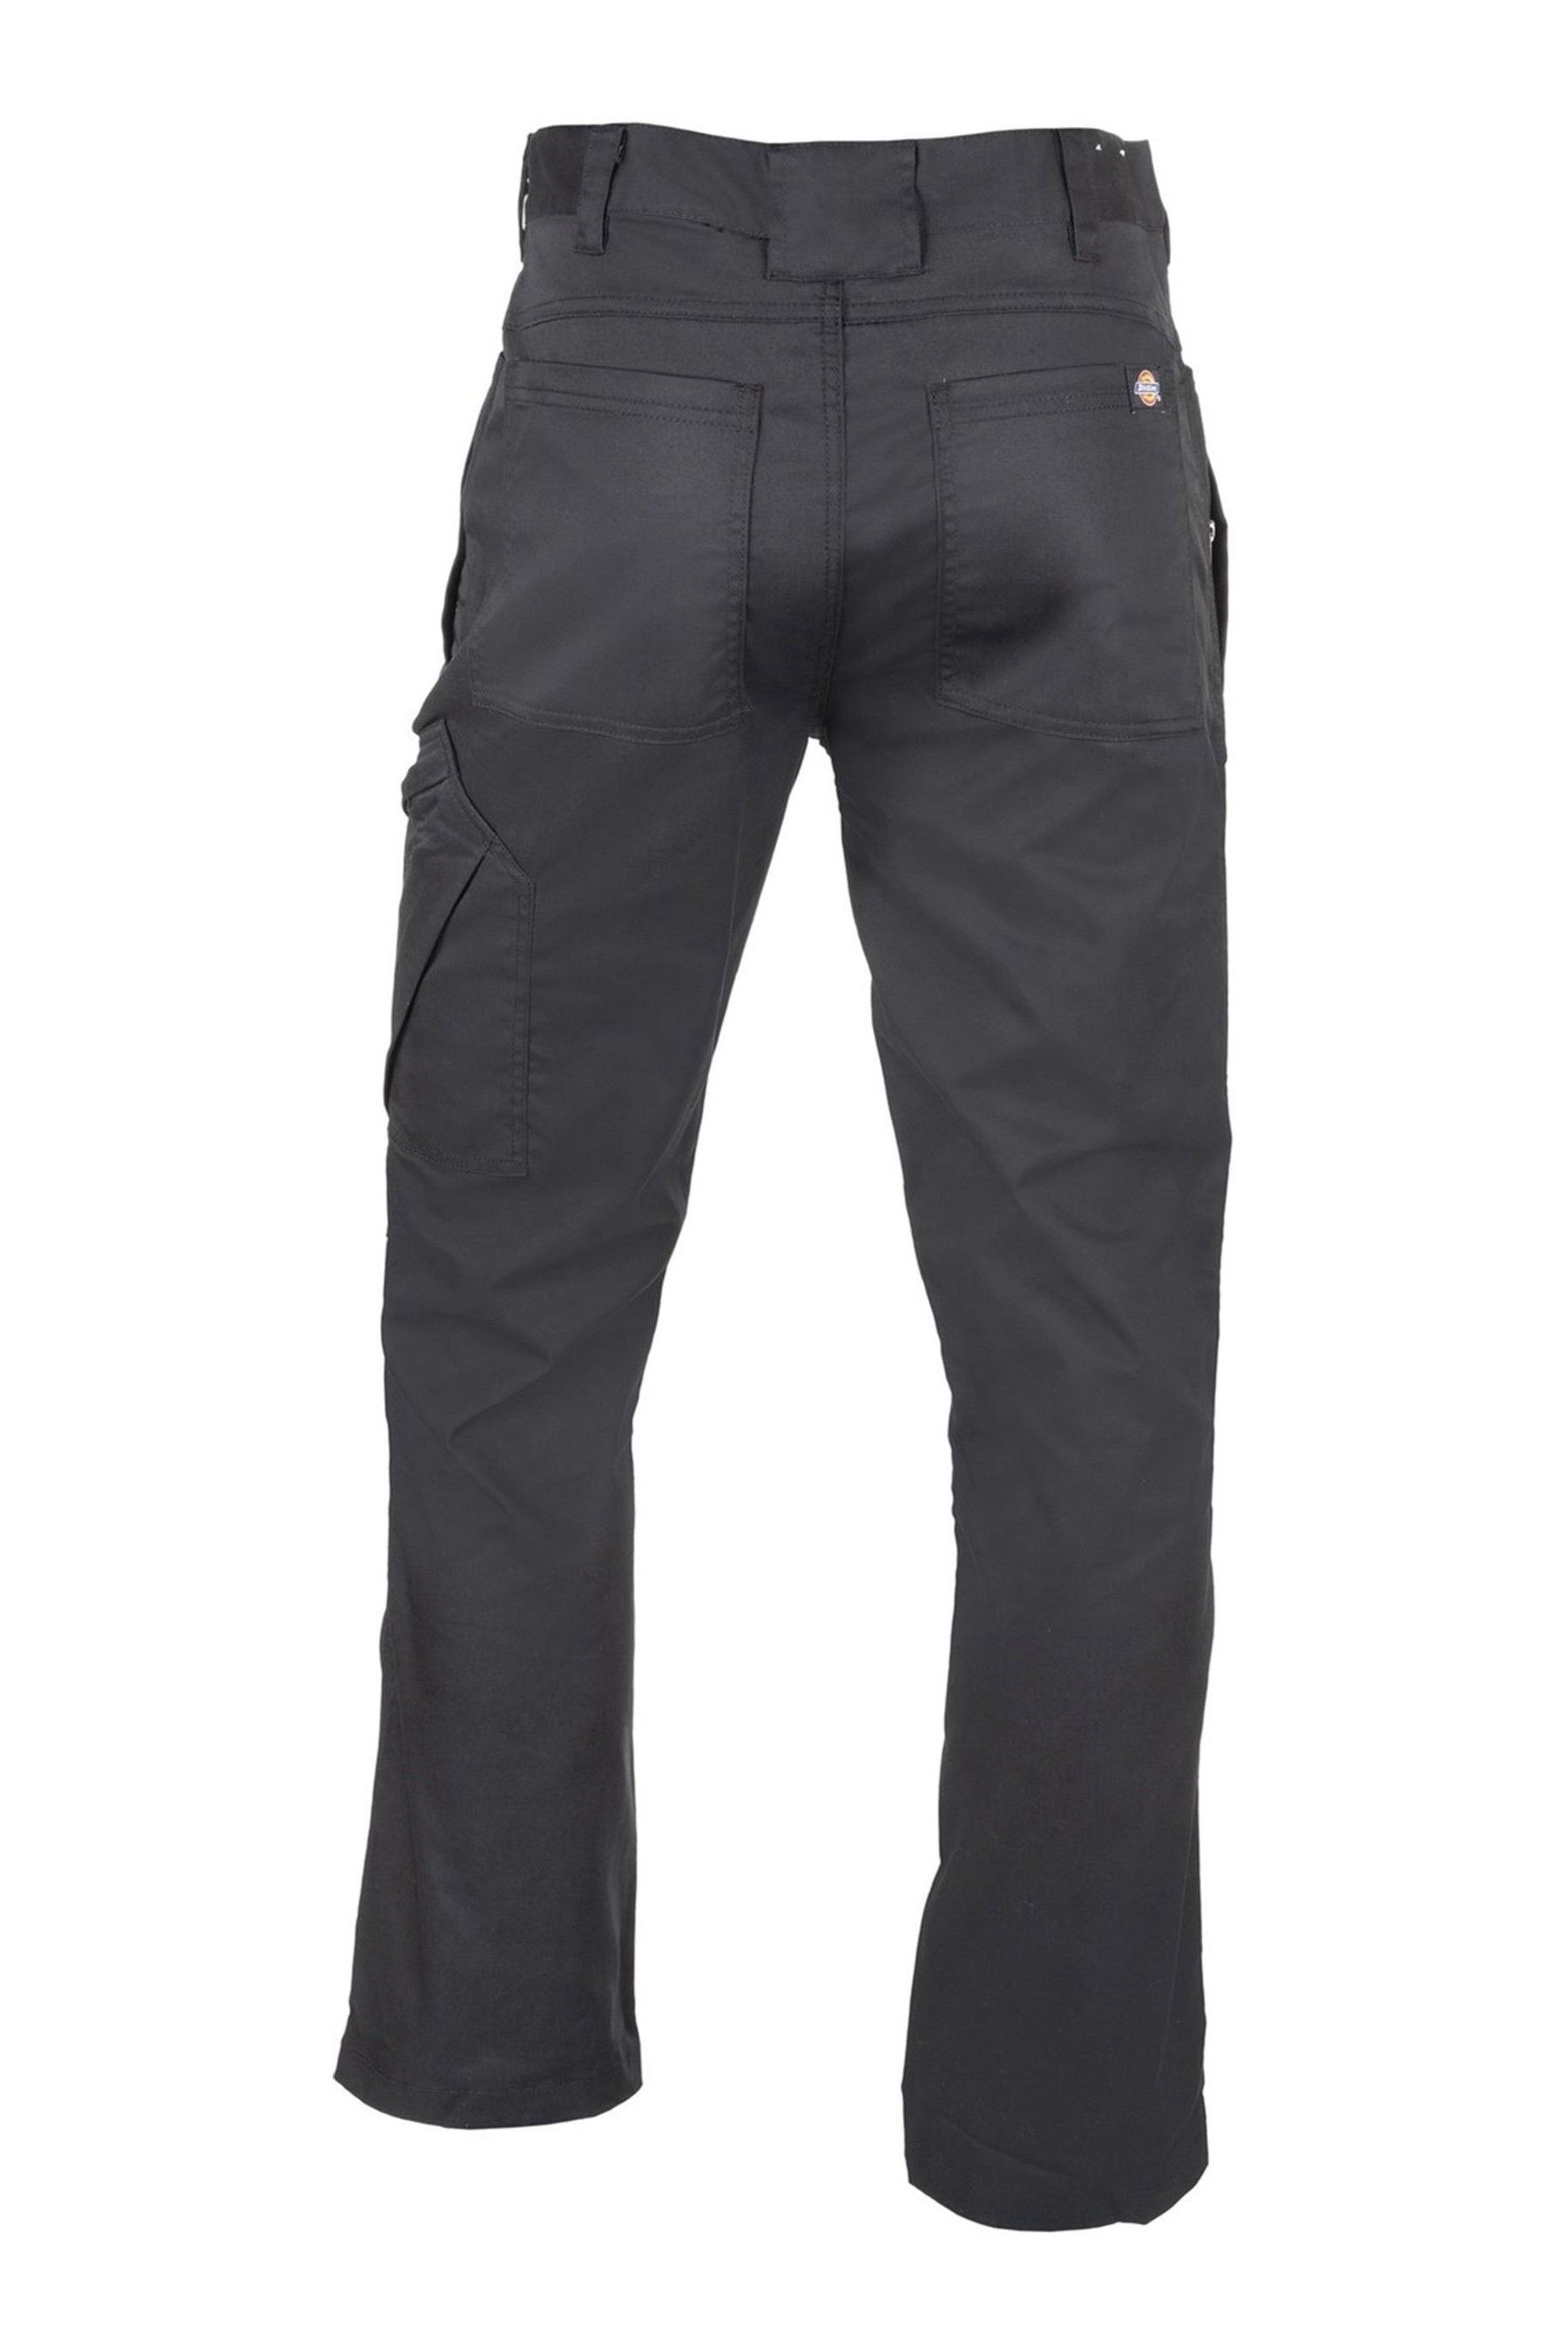 Buy Dickies Action Flex Black Trousers from the Next UK online shop